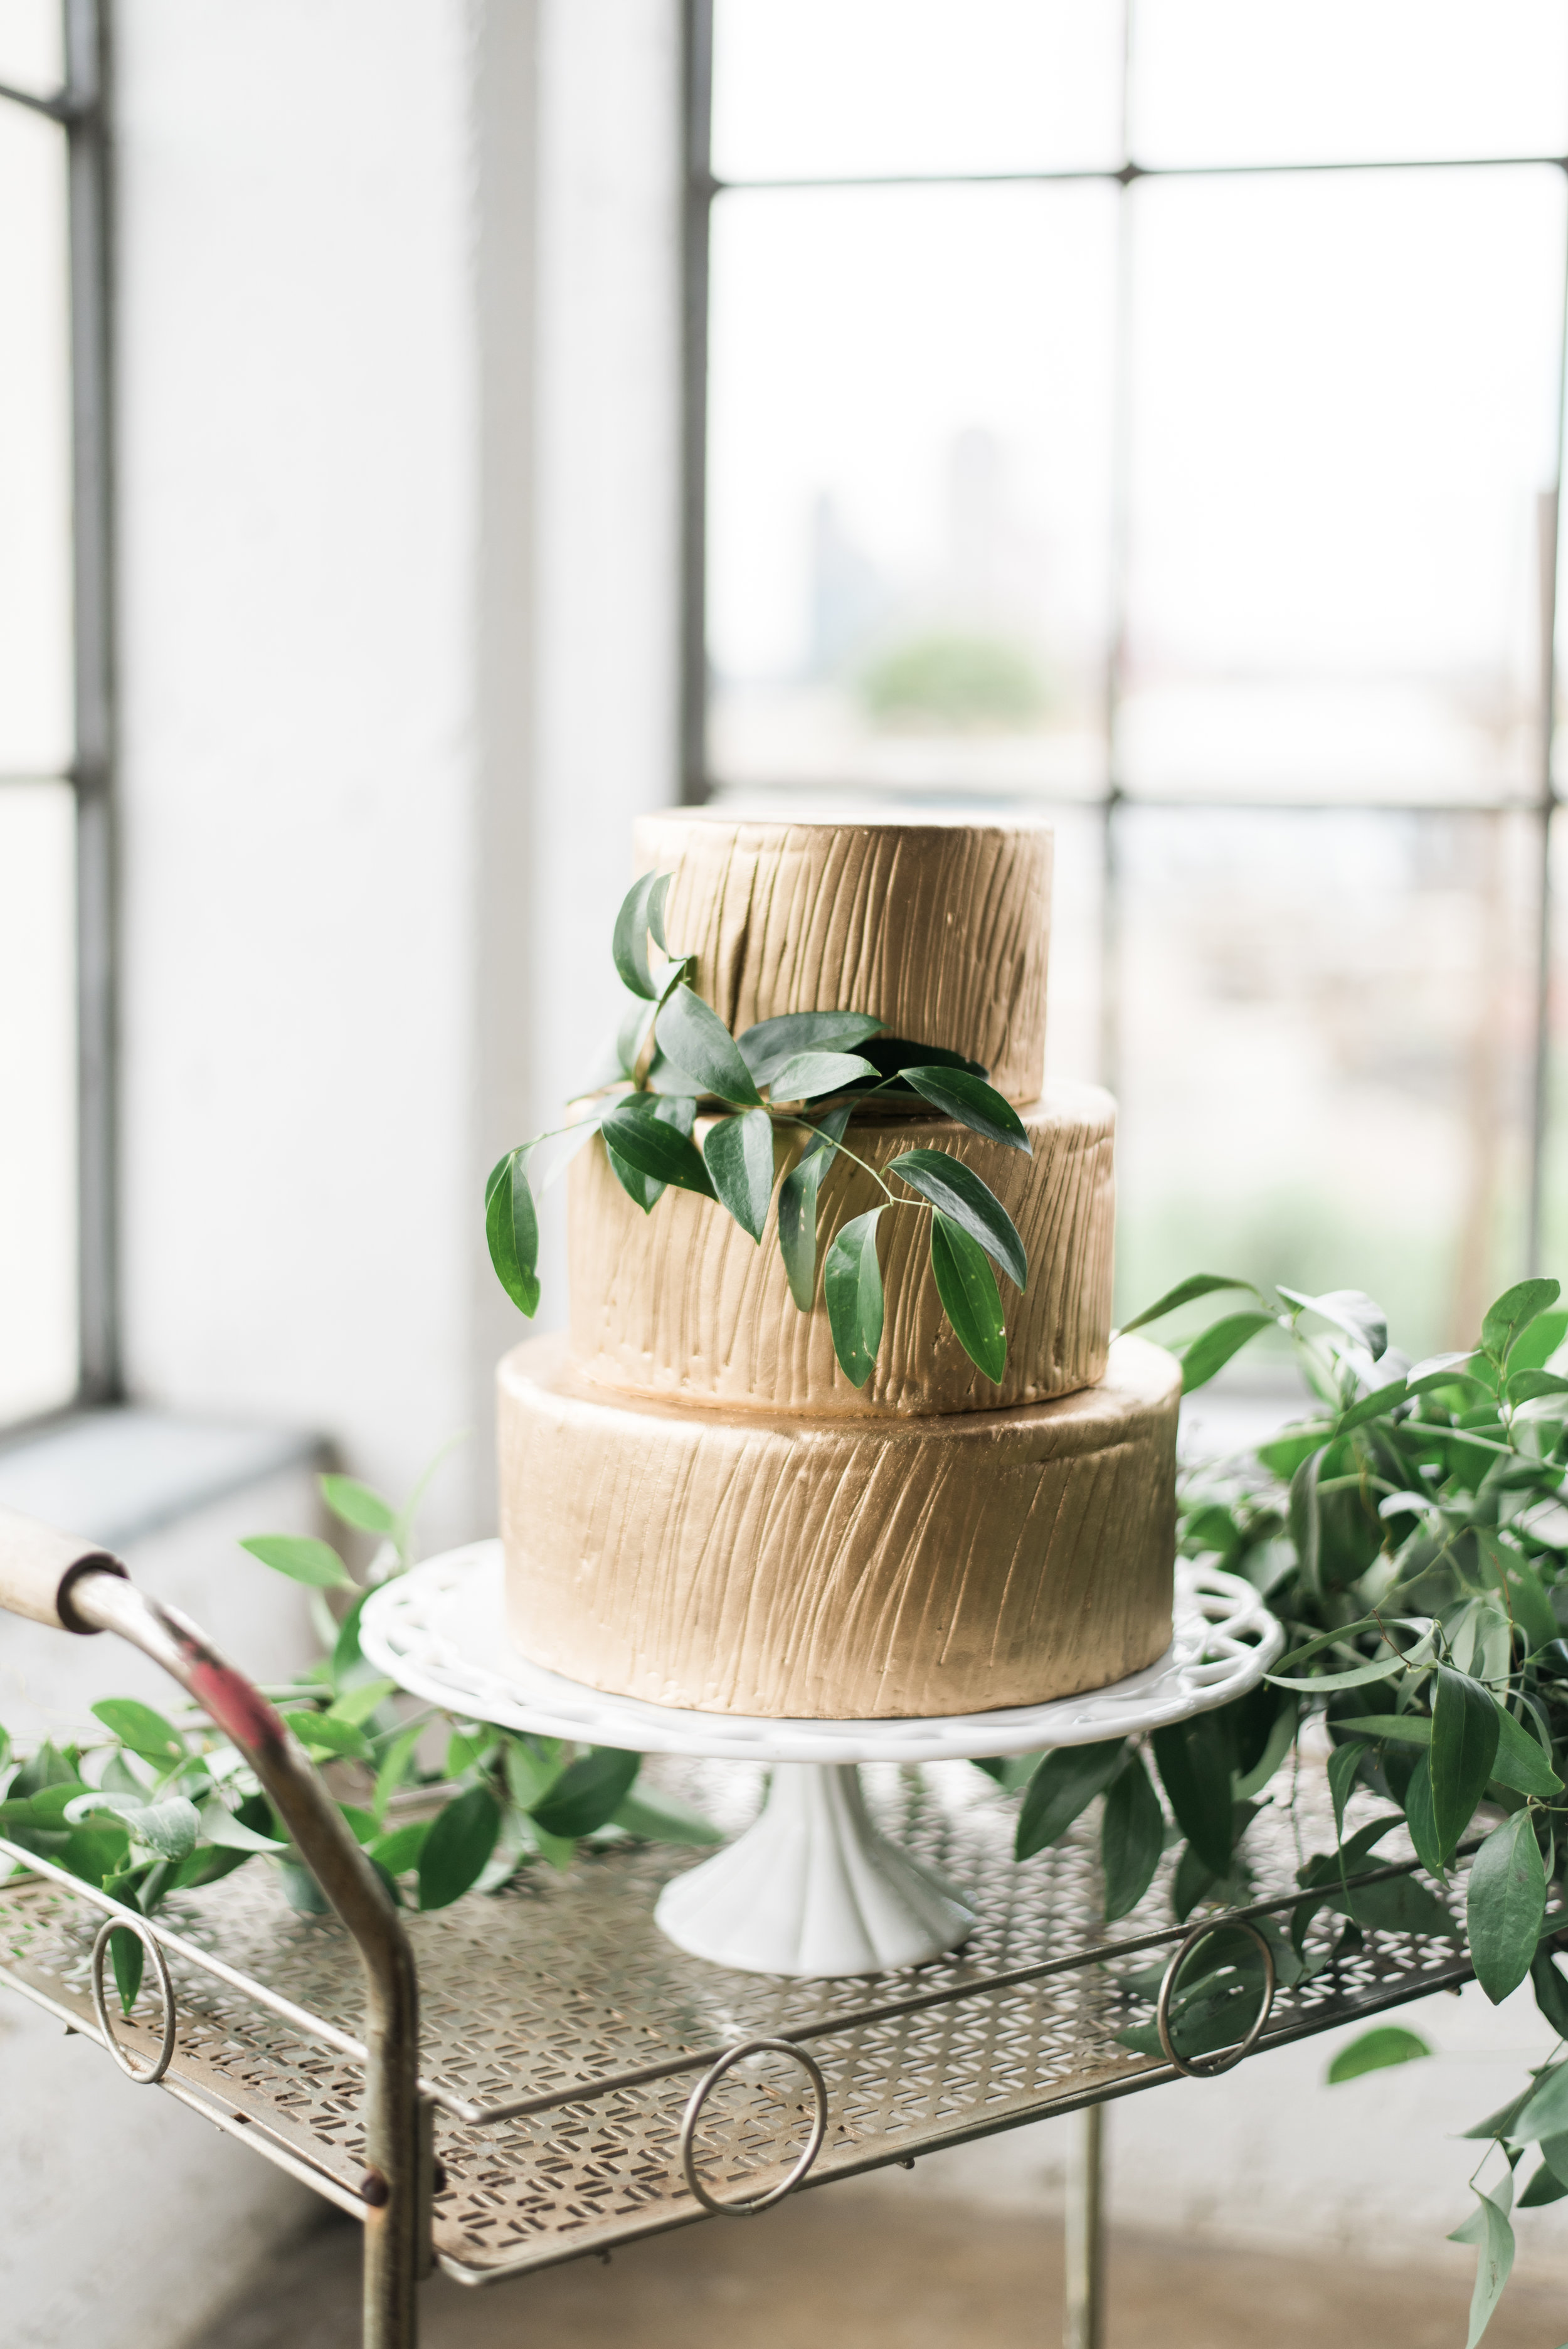  Brides of North Texas - Cloud Creative Events Styled Shoot 